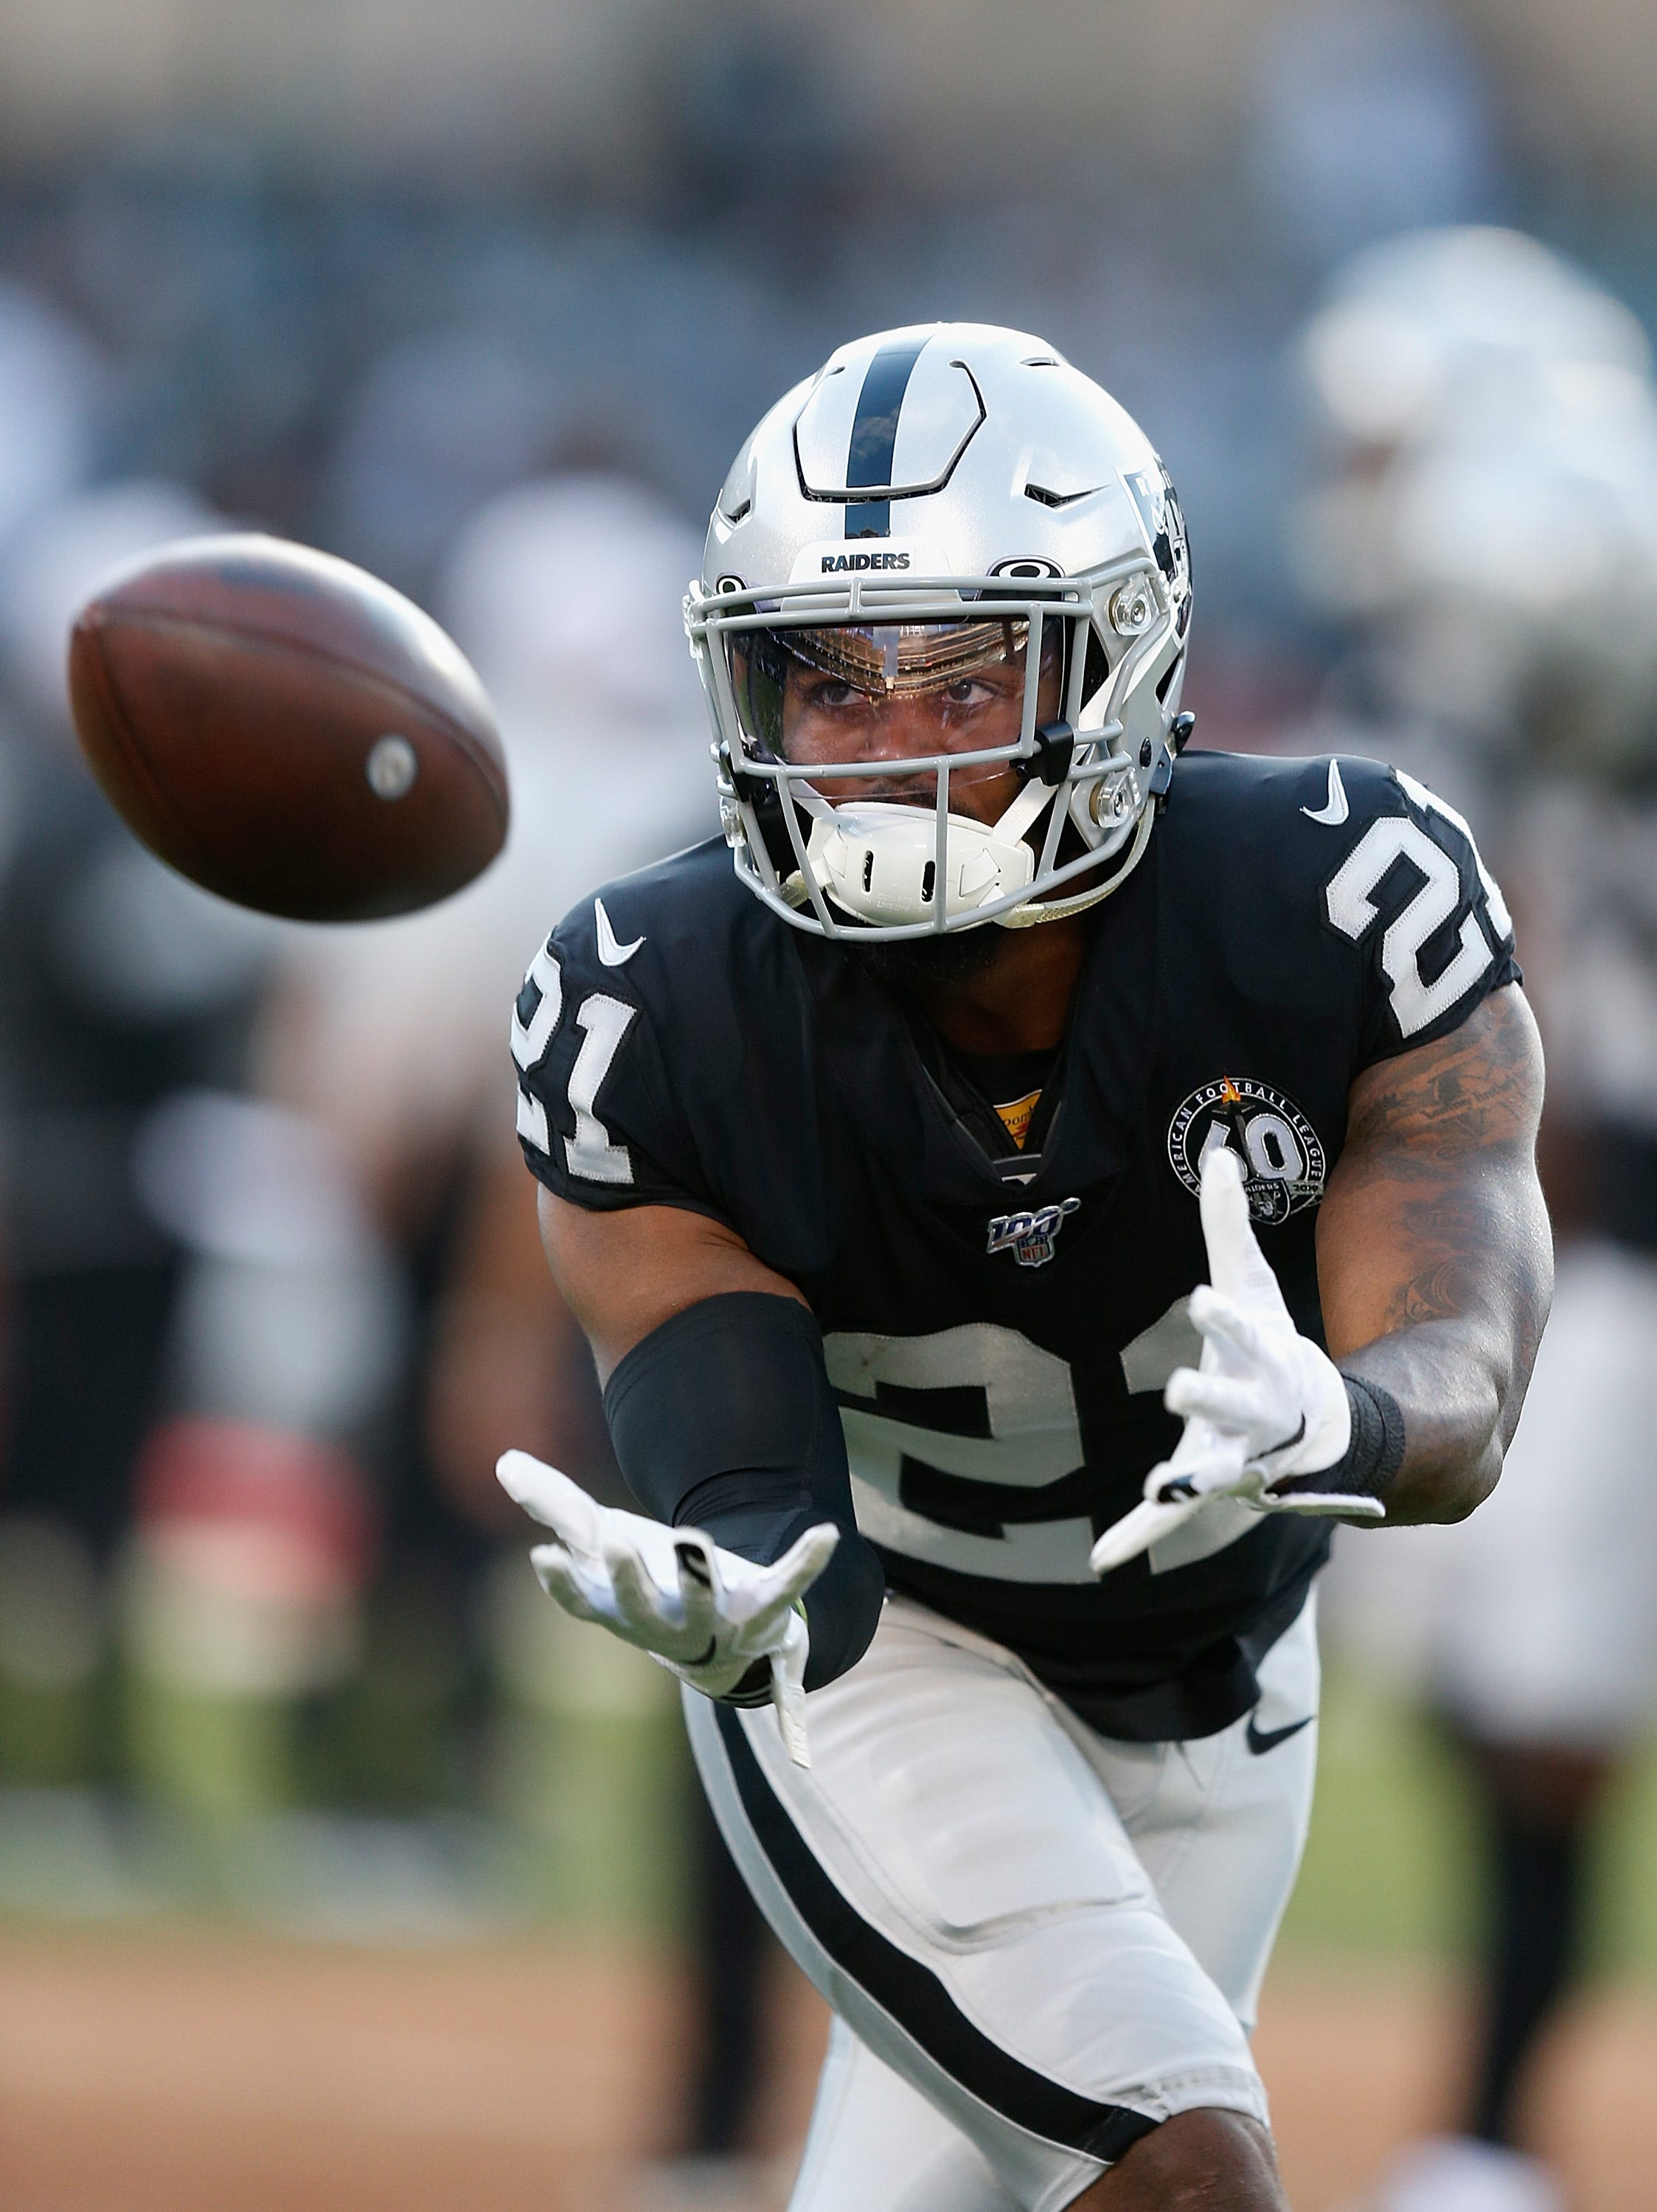 Former NFL CB Gareon Conley cleared by jury in yearslong sexual assault civil case